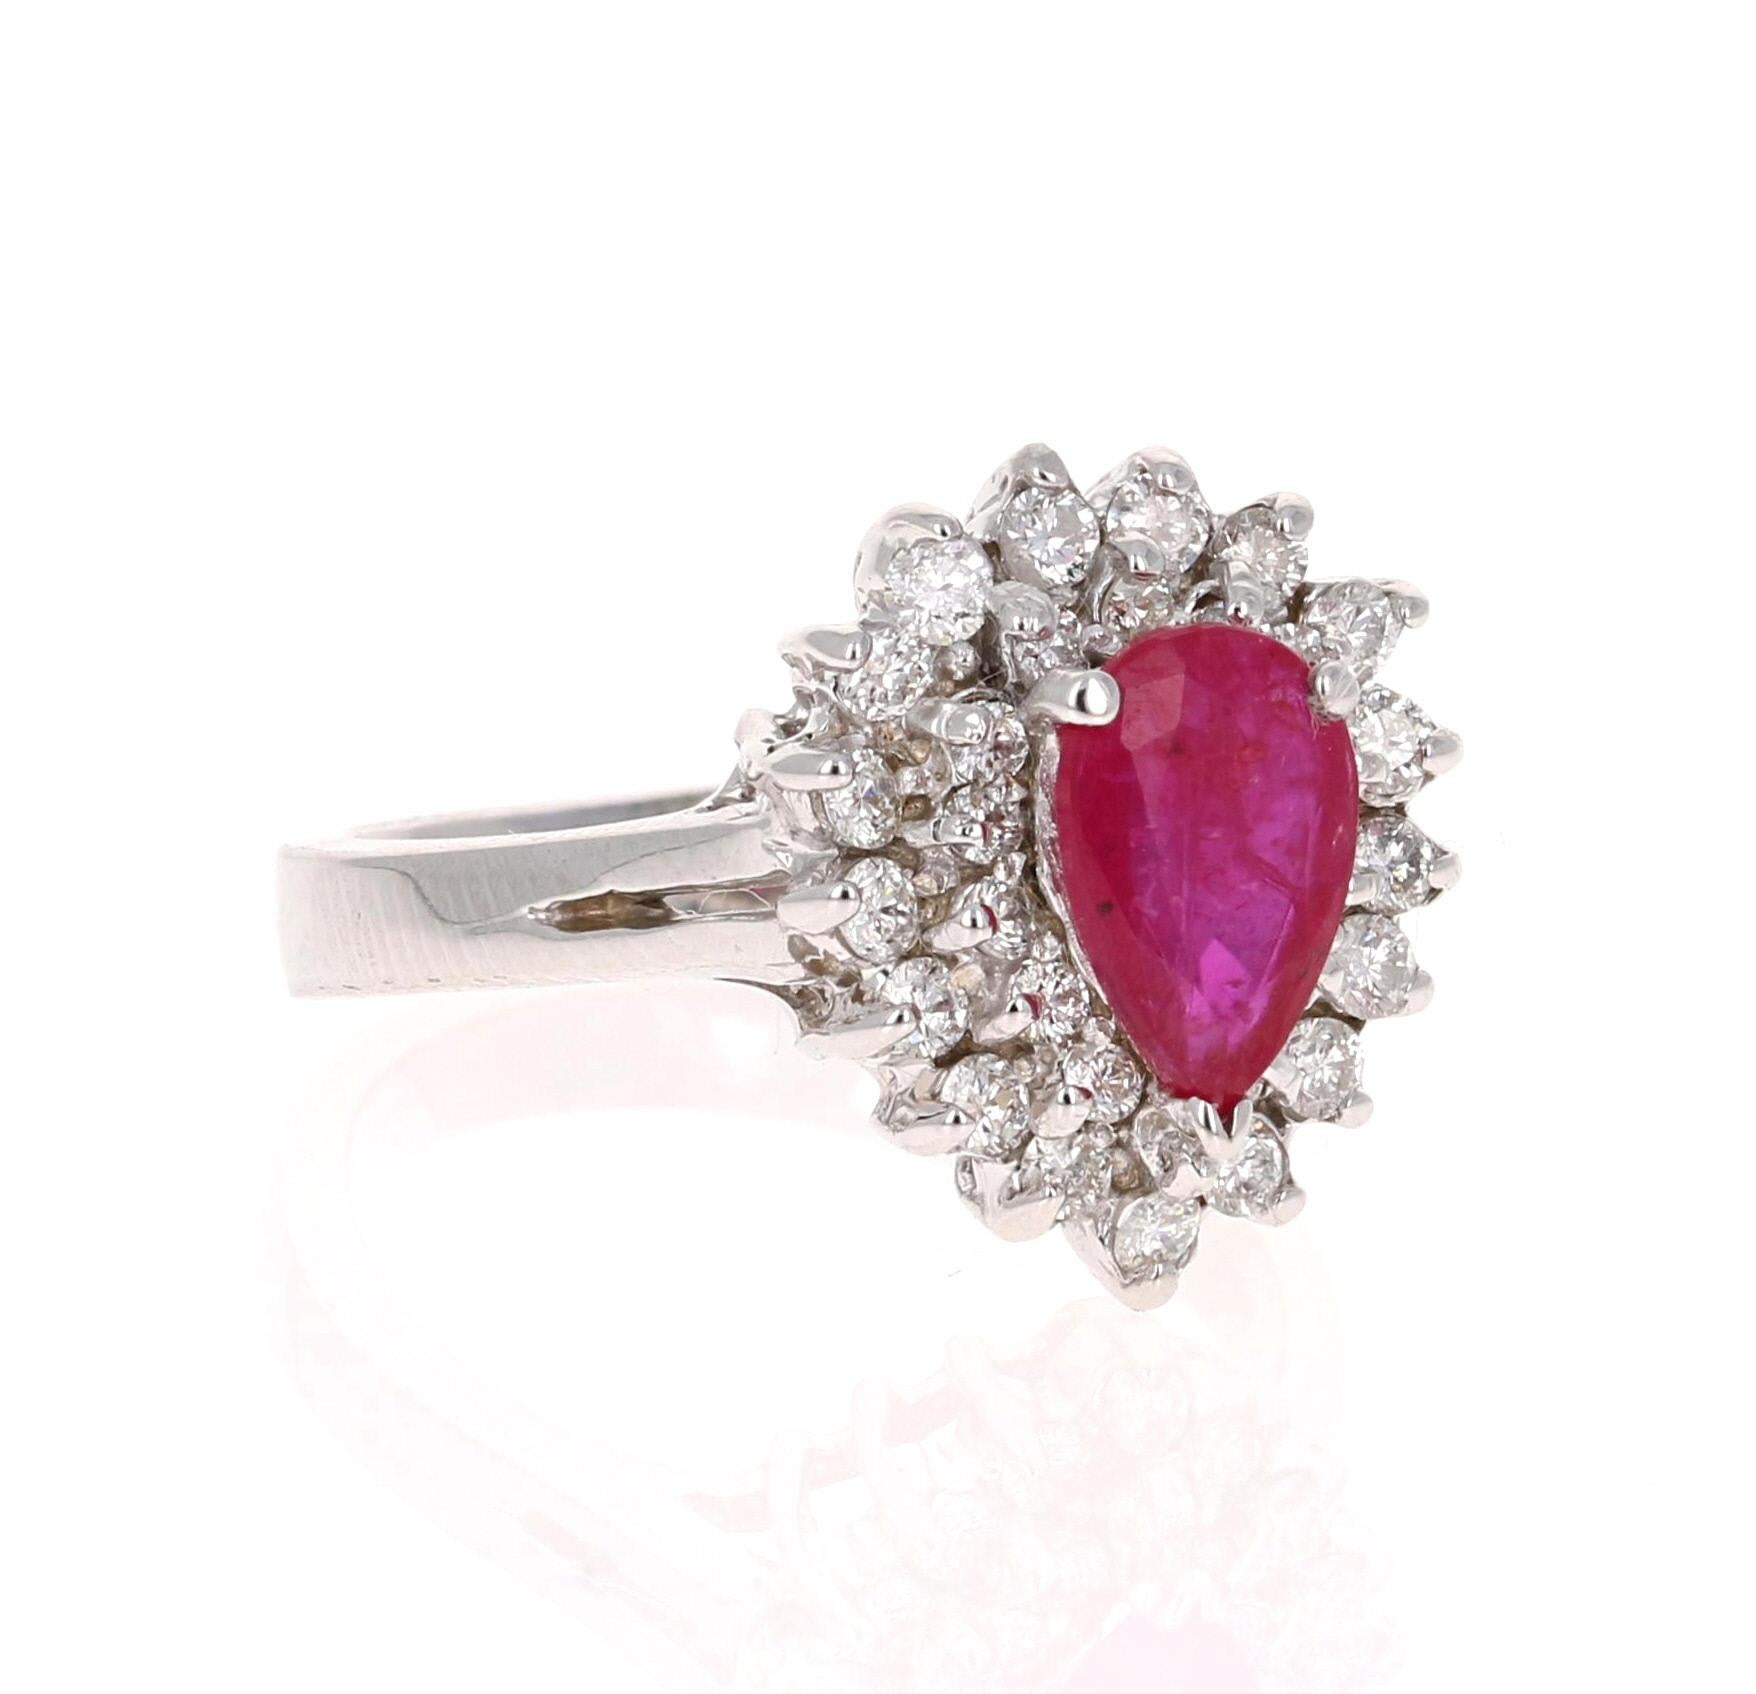 A simple yet beautiful ring with a 1.38 Carat Pear Cut Ruby as its center and 32 Round Cut Diamonds that weigh 0.65 carats. (Clarity: SI, Color: F) The total carat weight of the ring is 2.03 carats.

The origins of the Ruby are from Mozambique,